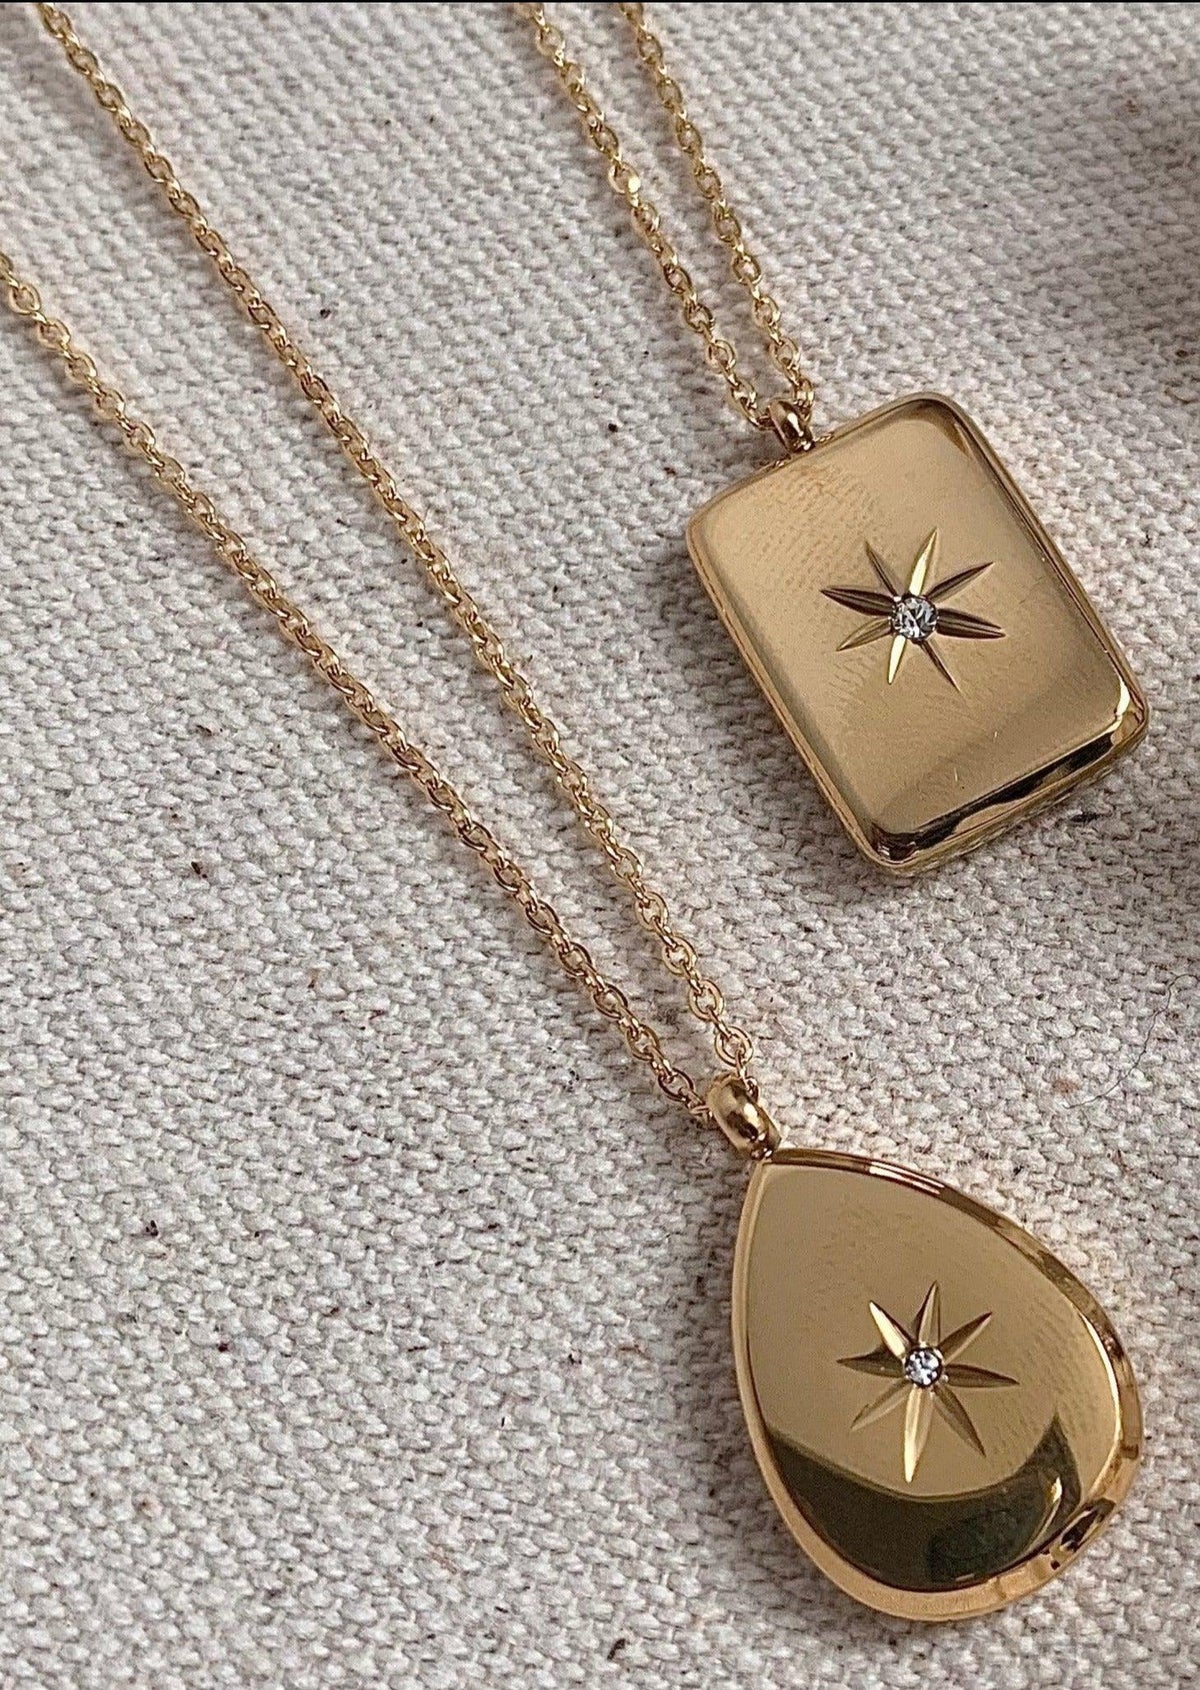 OutDazl - 18K Gold Plated Star Embossed Pendant Necklace - OutDazl